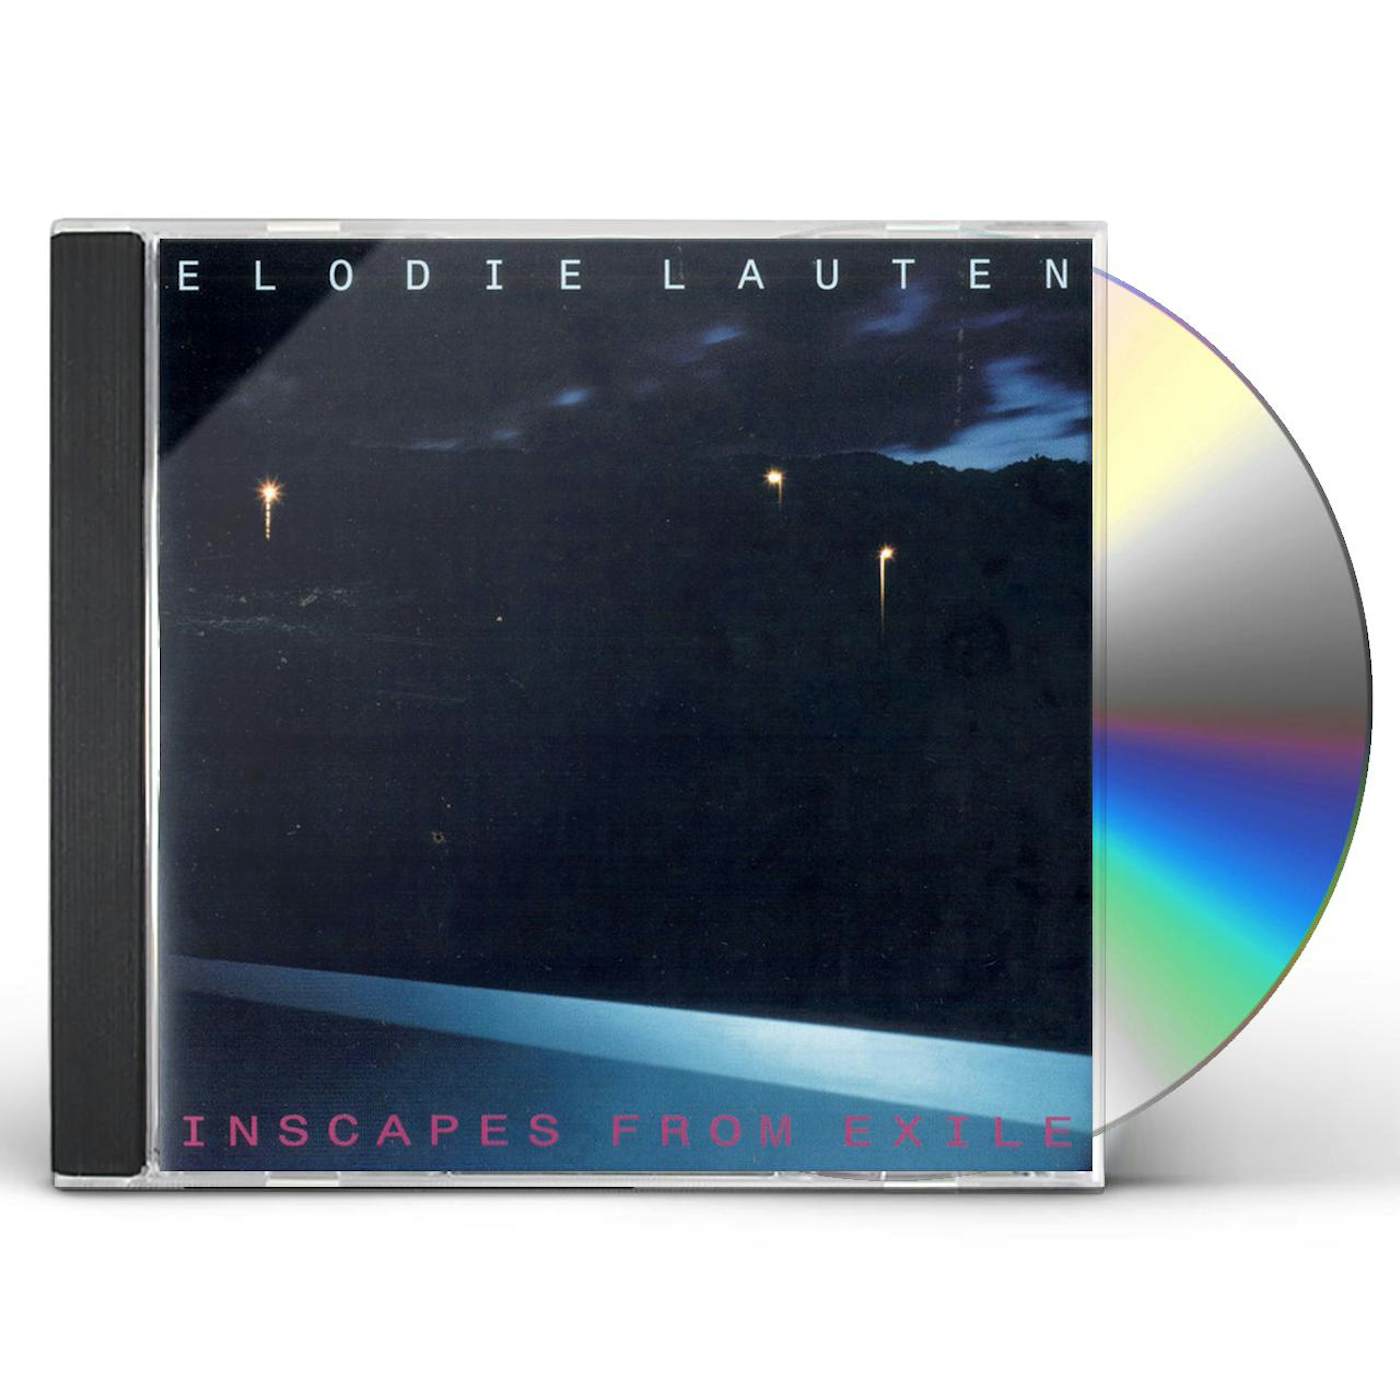 Elodie Lauten INSCAPES FROM EXILE CD